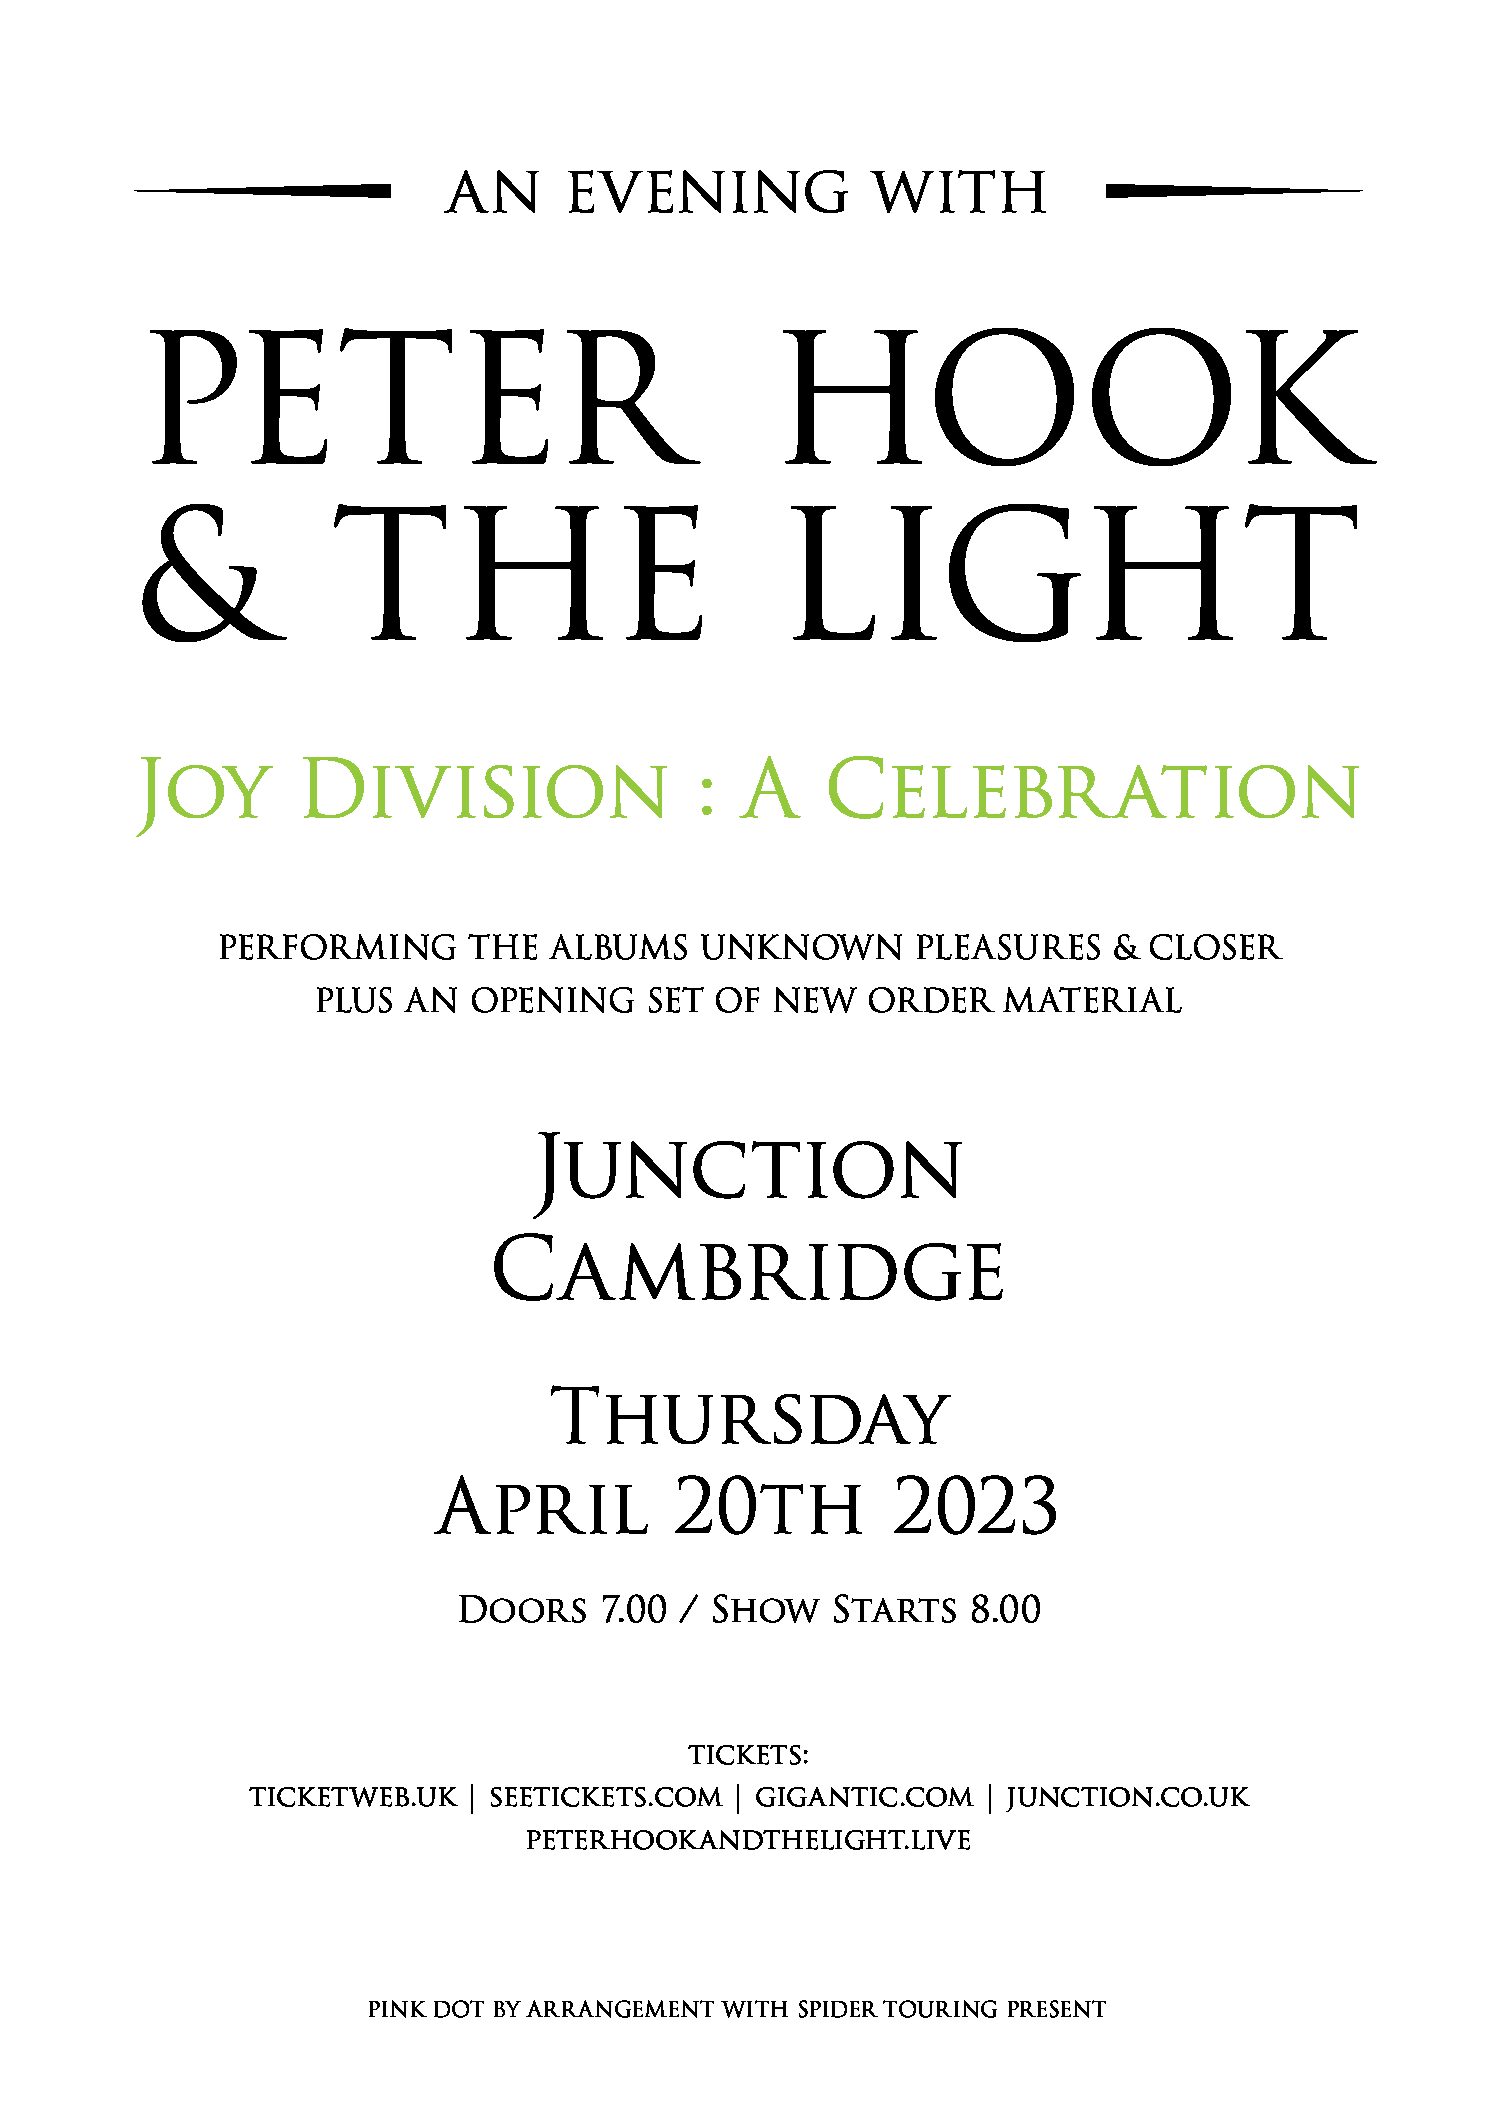 SOLD OUT - PETER HOOK & THE LIGHT JOY DIVISION